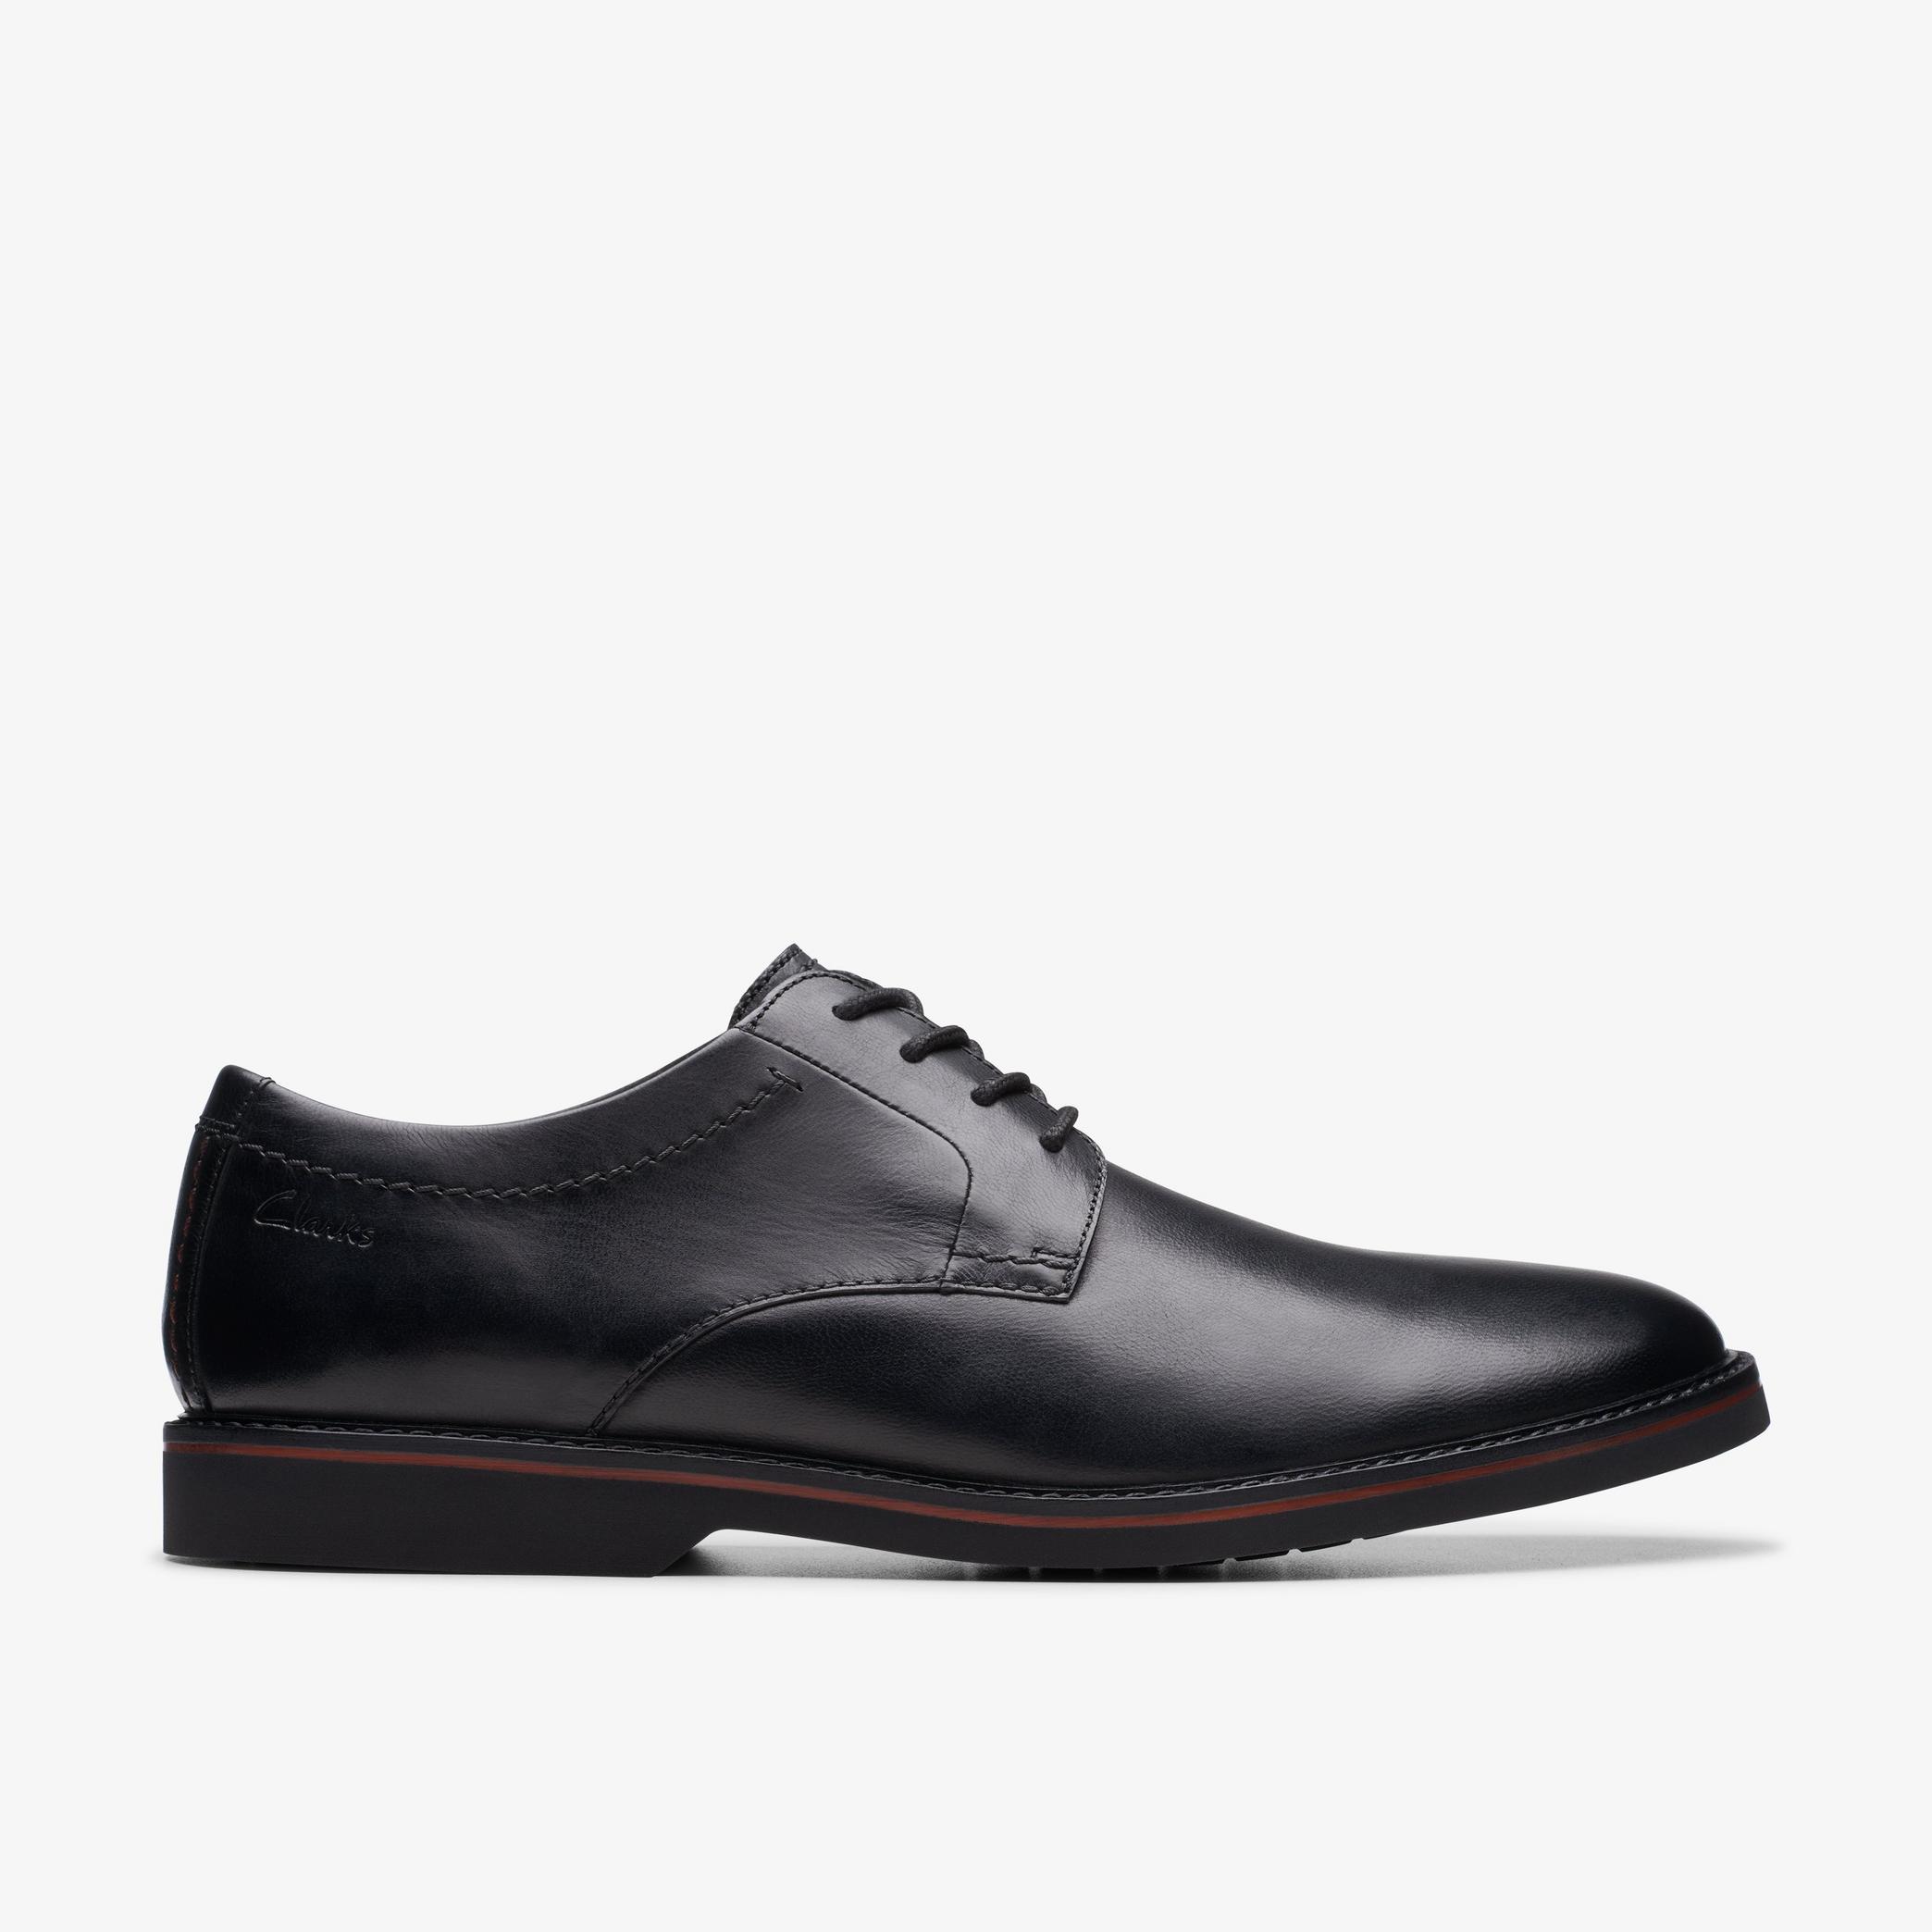 Atticus Lace Black Oxford Shoes, view 1 of 7